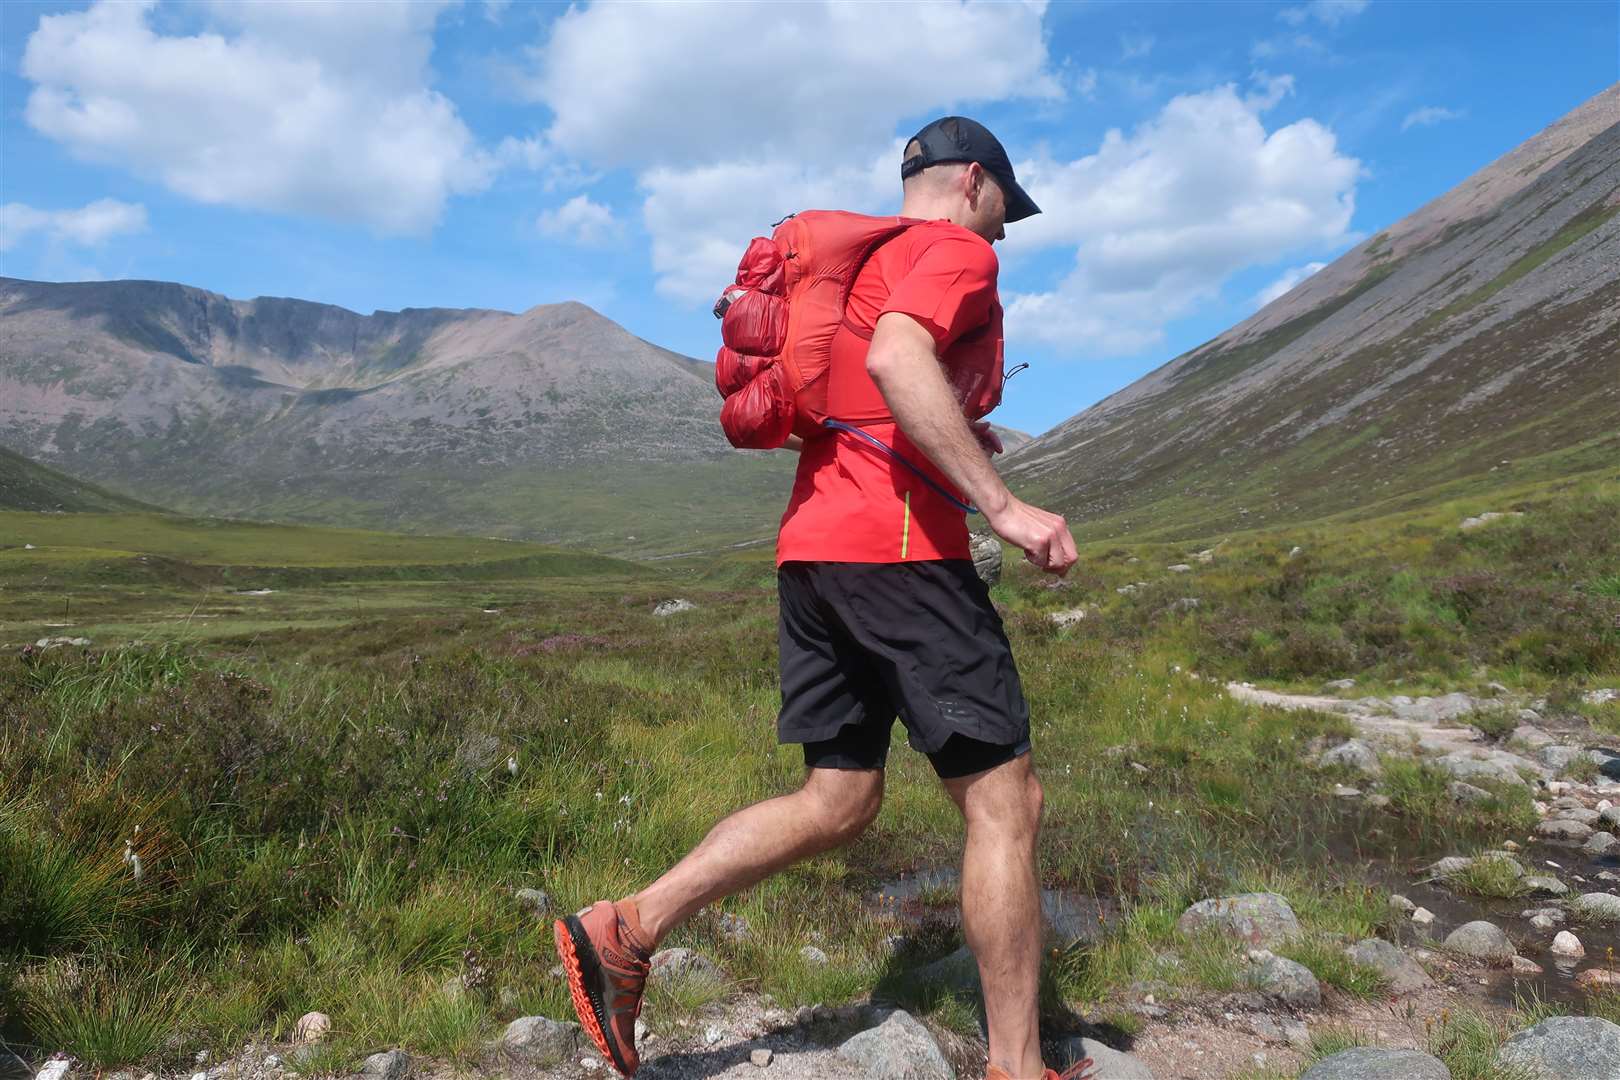 Moving along the Lairig Ghru path with the Cairngorms mountains for company.